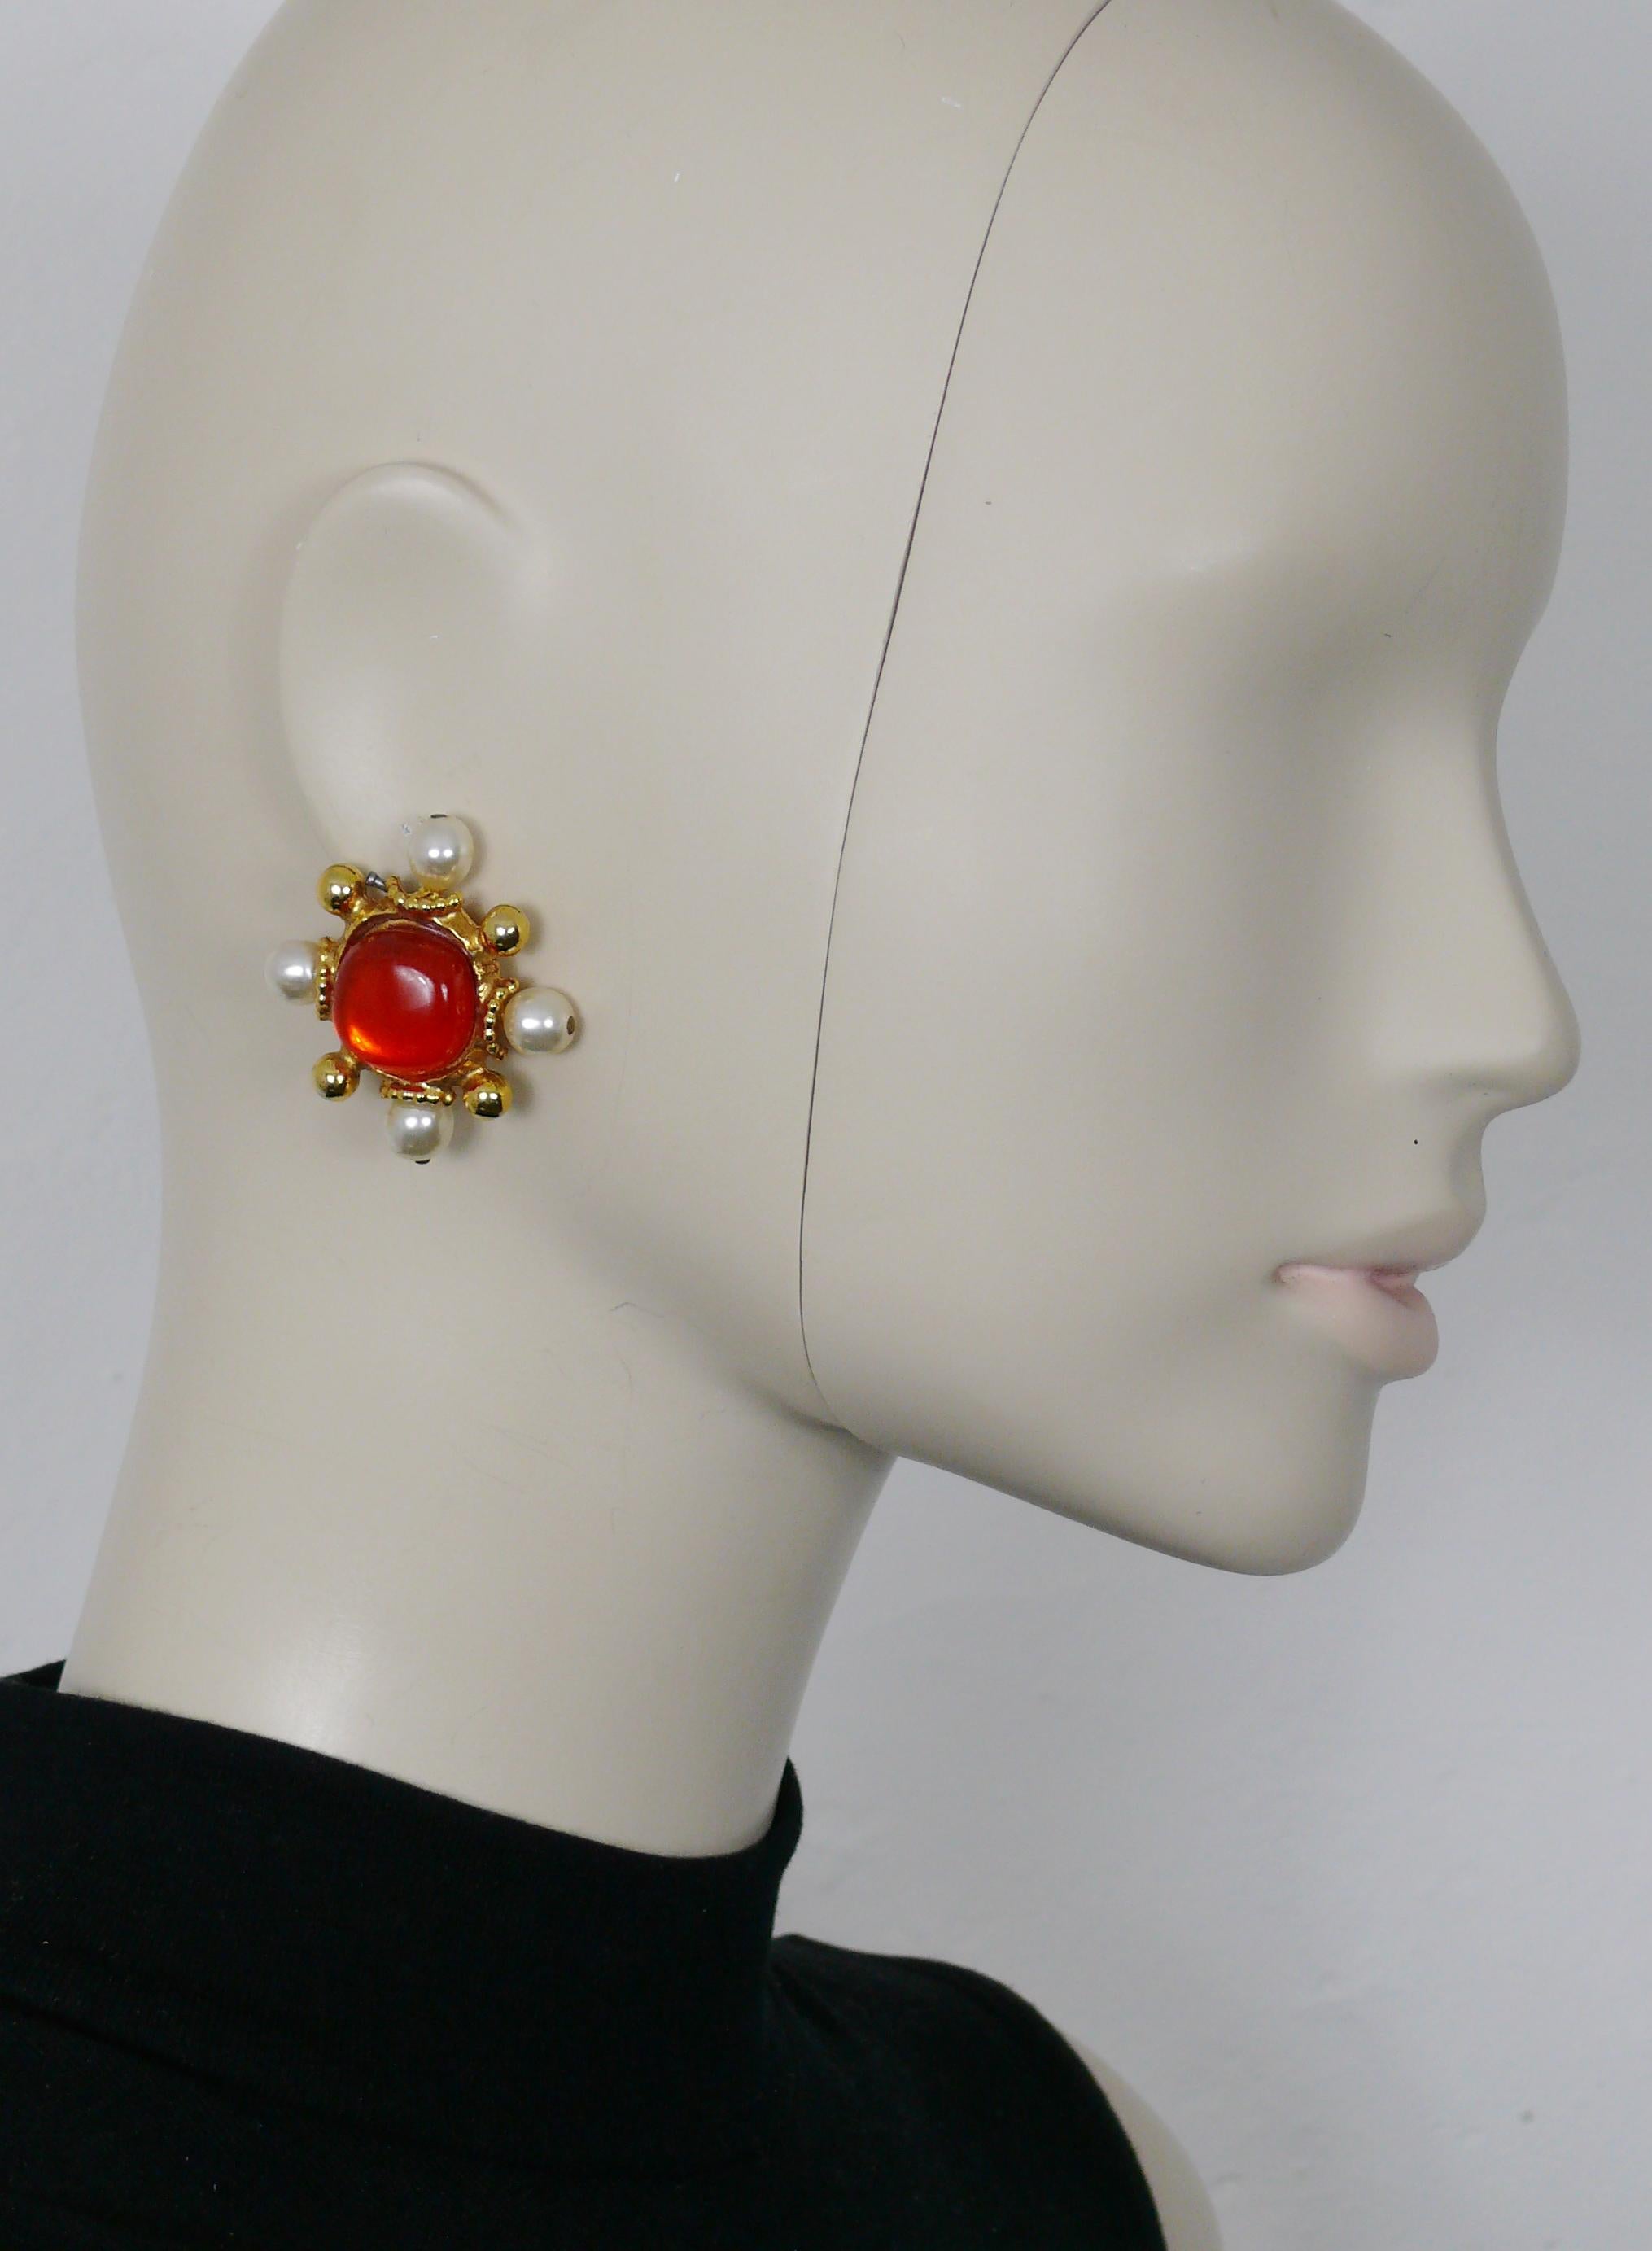 CHRISTIAN LACROIX vintage gold toned clip-on earrings embellished with an orange resin cabochon at the center surrounded by faux pearls.

Marked CL PARIS CHRISTIAN LACROIX.

Indicative measurements : approx. 4 cm x 4 cm (1.57 inches x 1.57